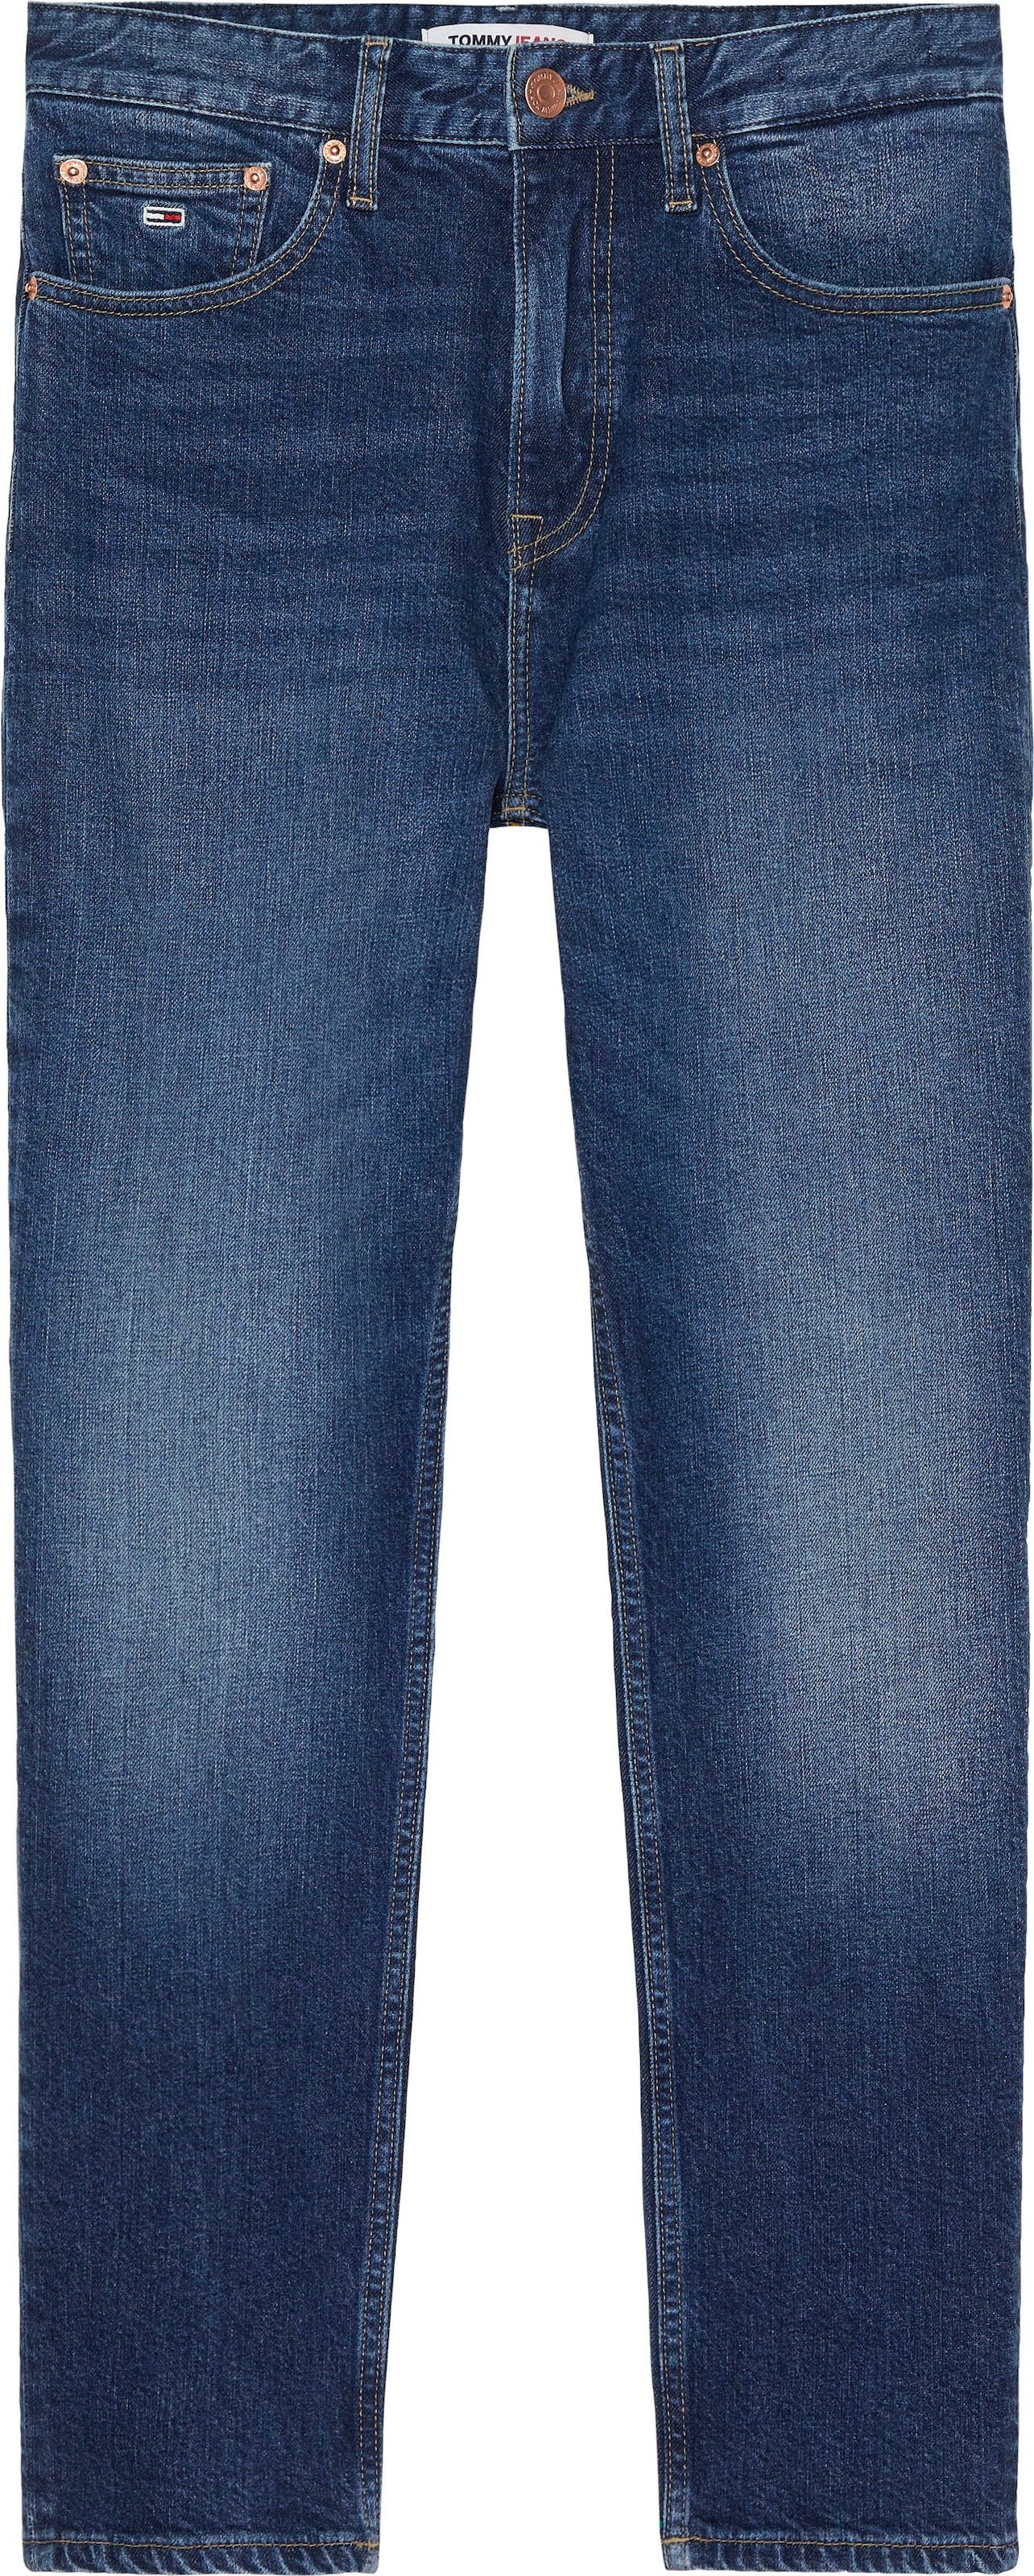 Jeans Slim-fit-Jeans ANK Tommy »IZZIE OTTOversand bei SL Tommy Logo-Badge mit CG4139«, HR